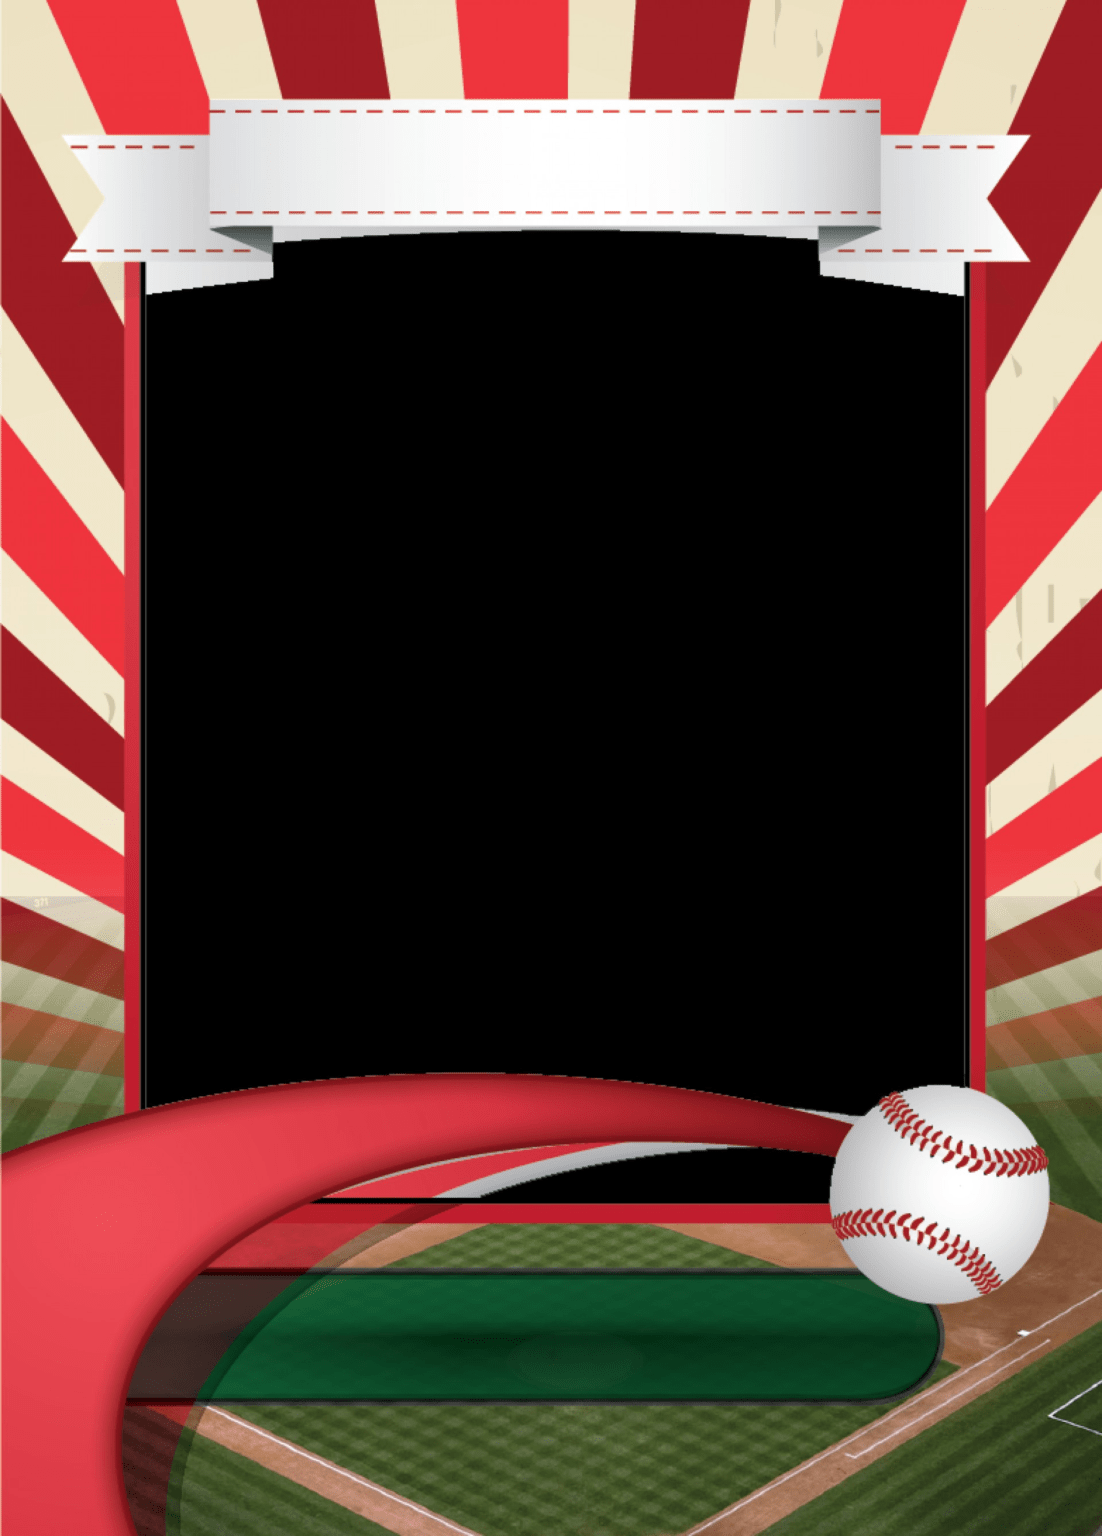 026-free-baseball-card-template-pleasant-best-s-of-templates-for